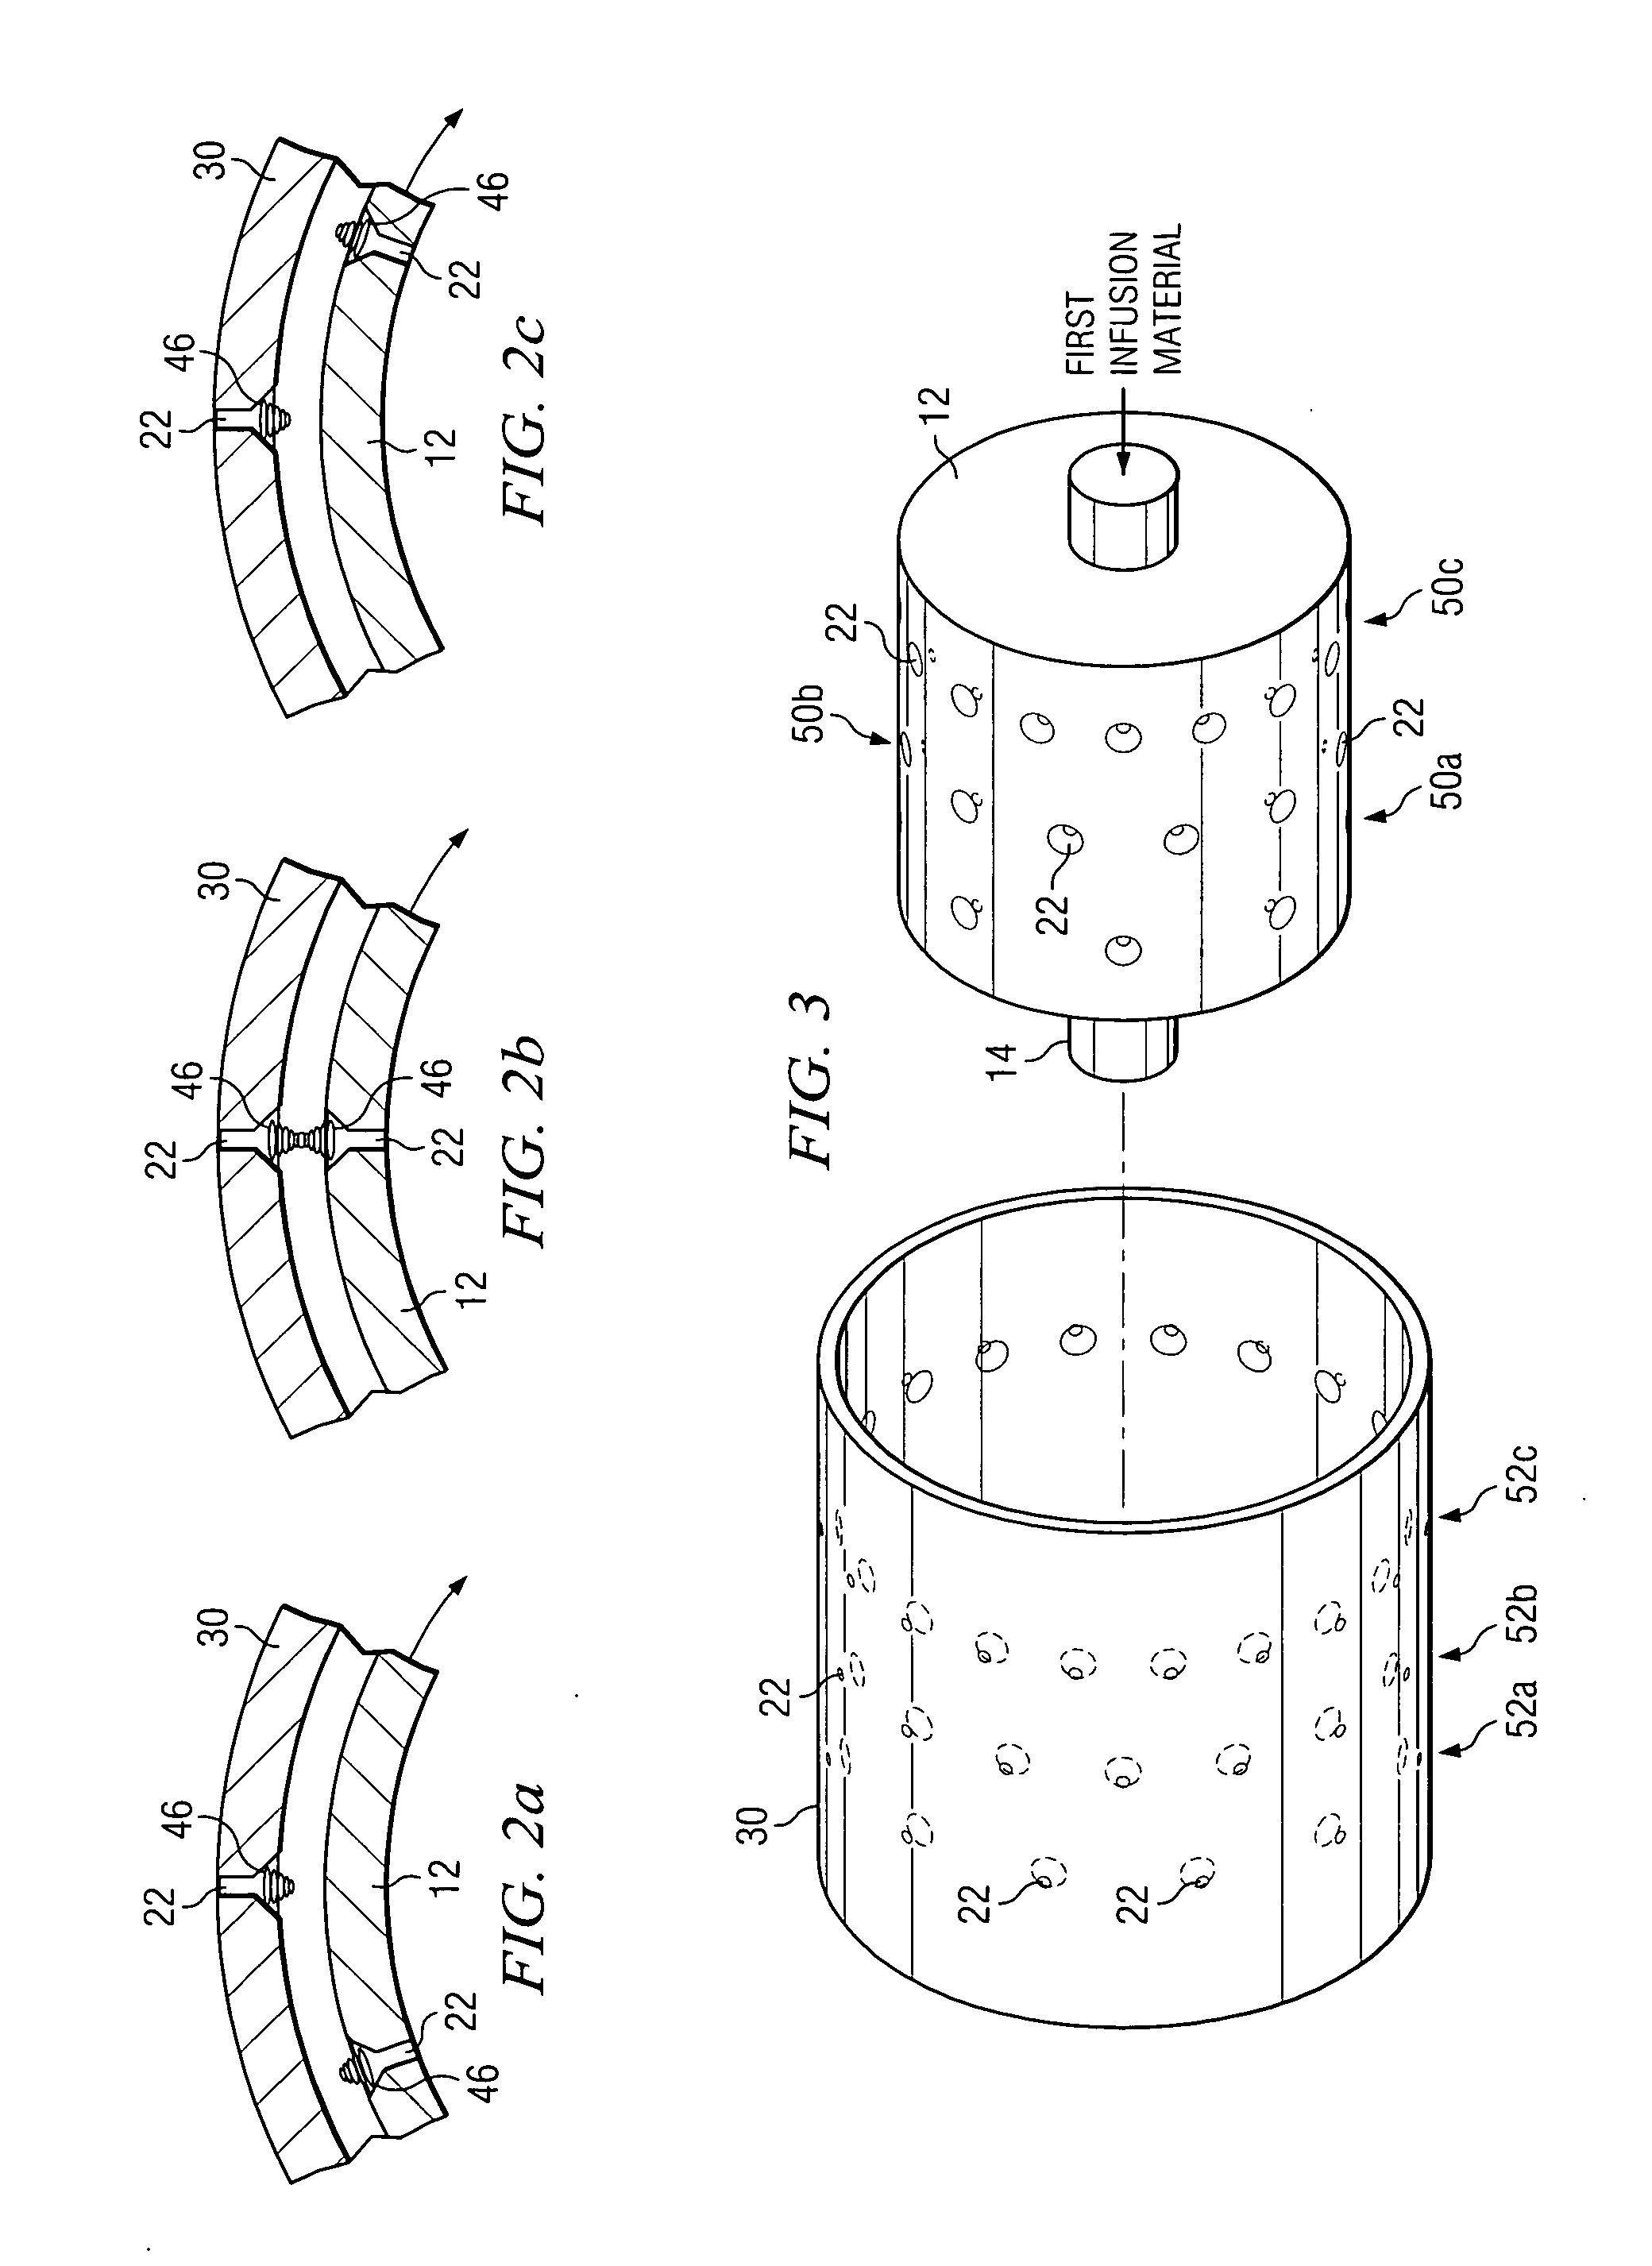 System and method for therapeutic application of dissolved oxygen